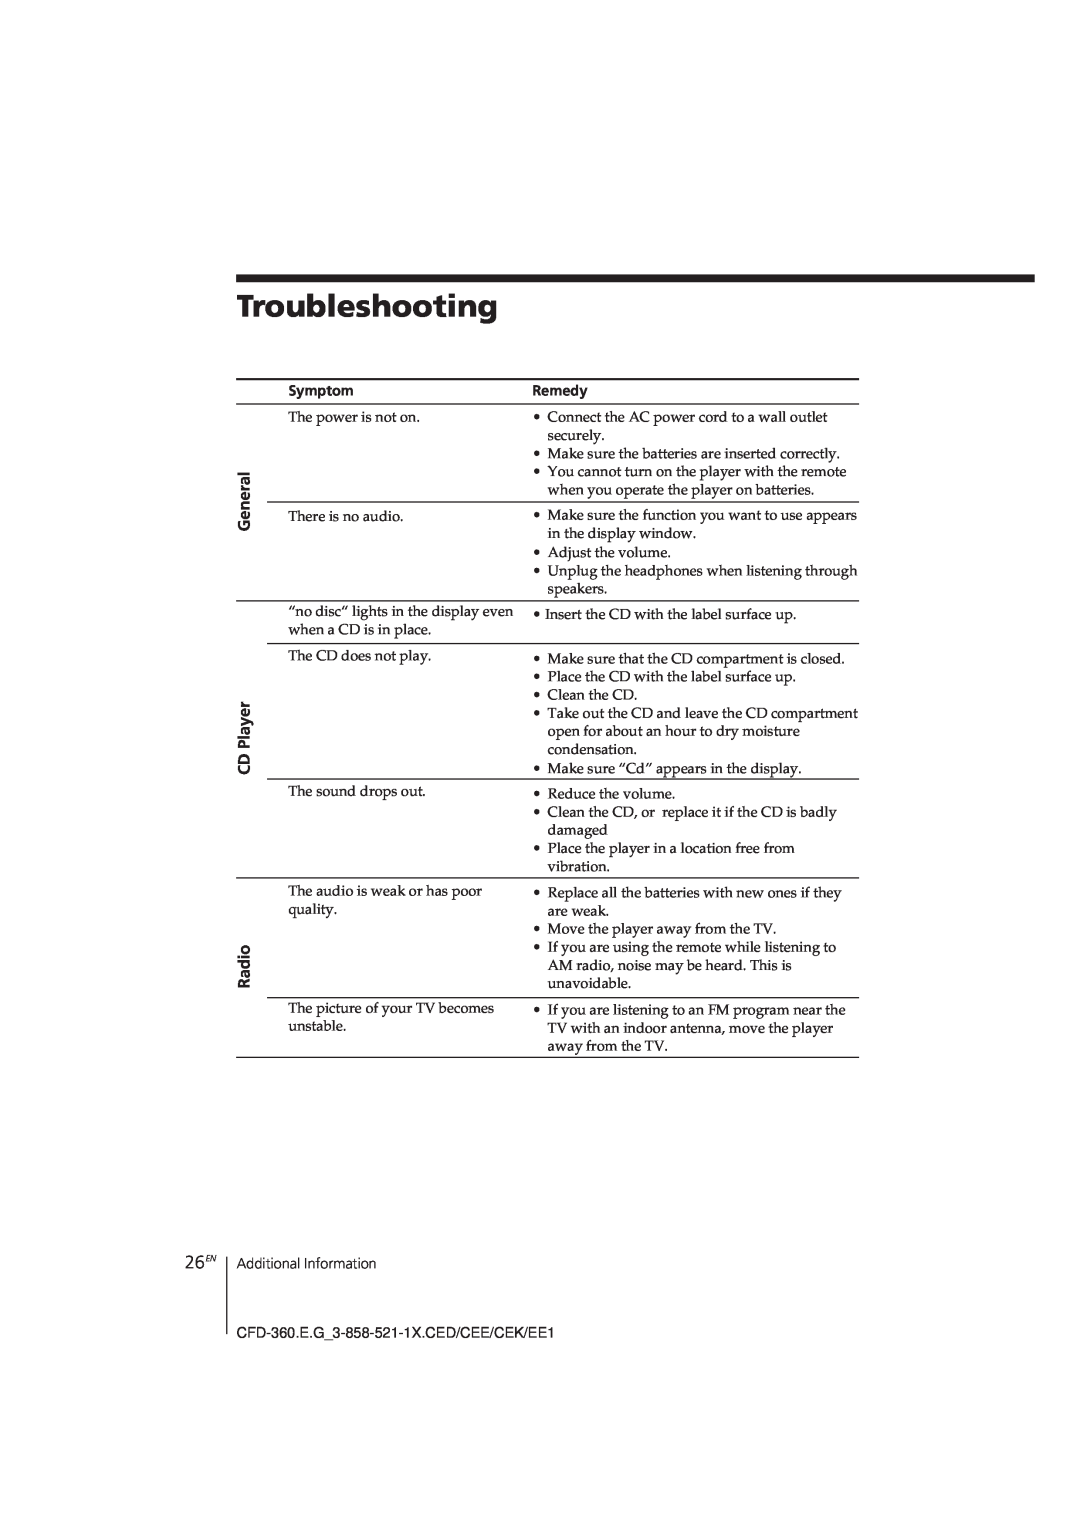 Sony CFD-360 operating instructions Troubleshooting, 26EN, Symptom, Remedy 